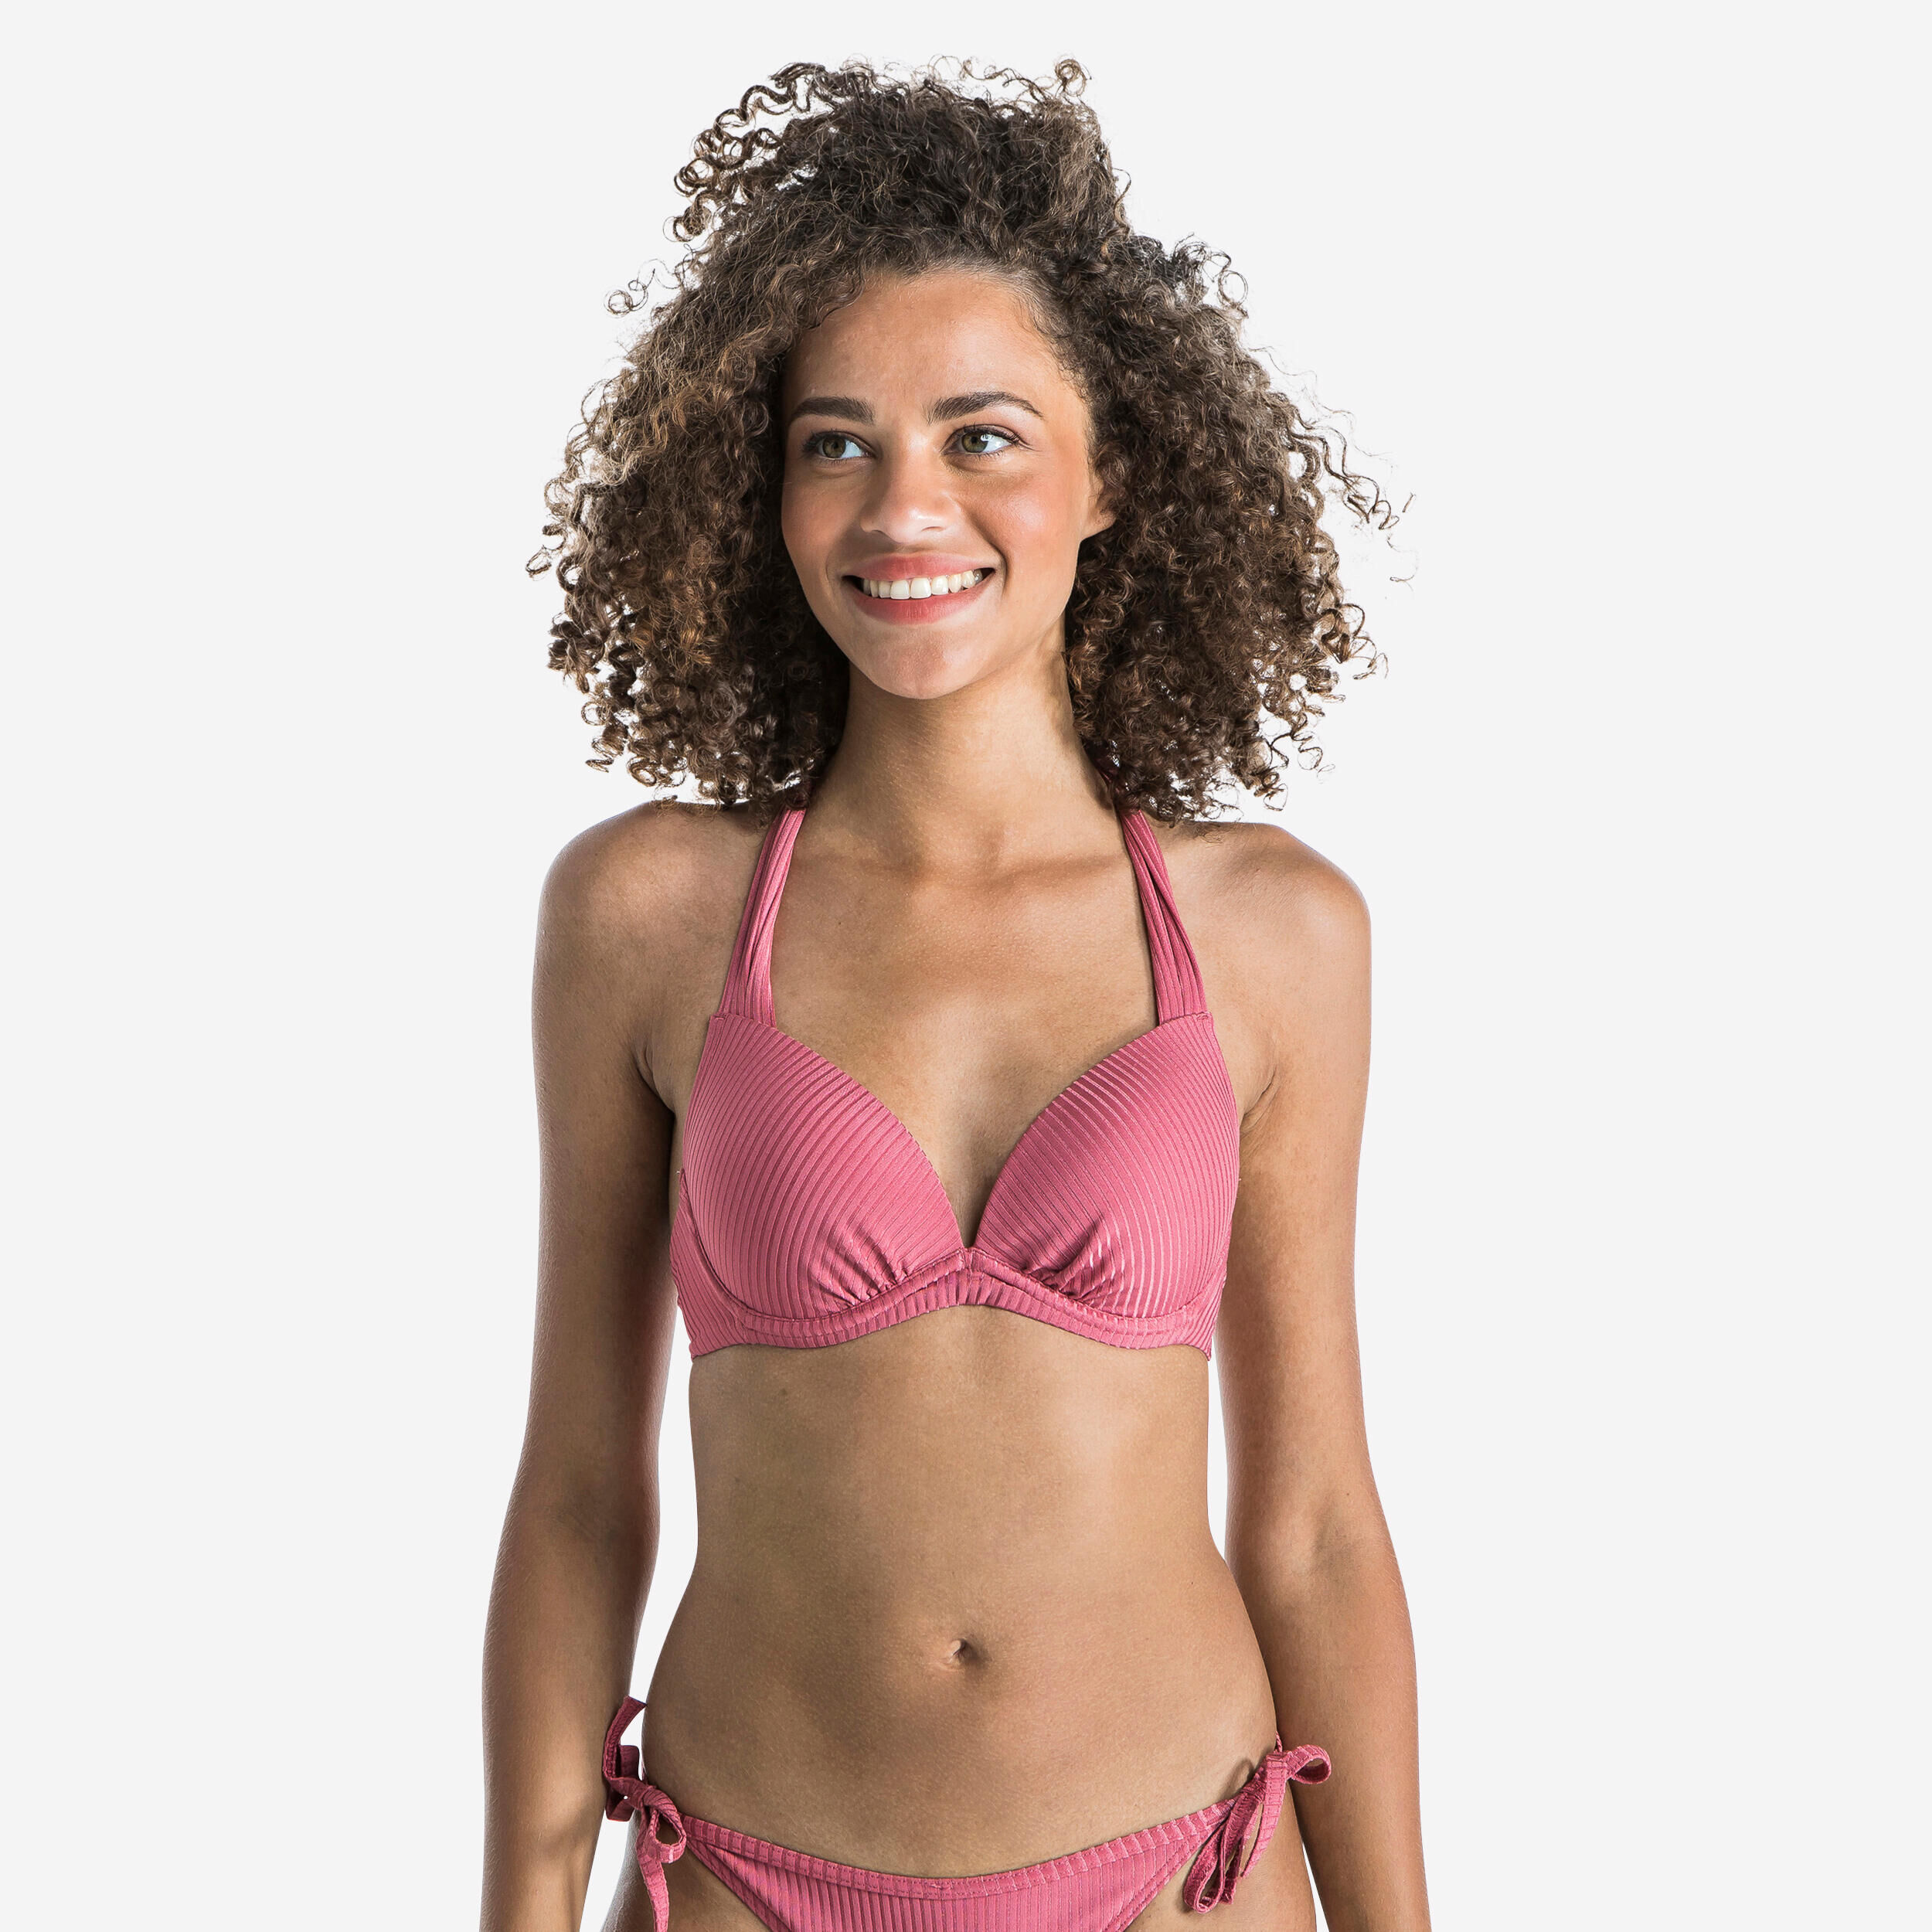 OLAIAN Women's Push-Up Swimsuit Top with Fixed Padded Cups ELENA - RIBBED PLAIN PINK